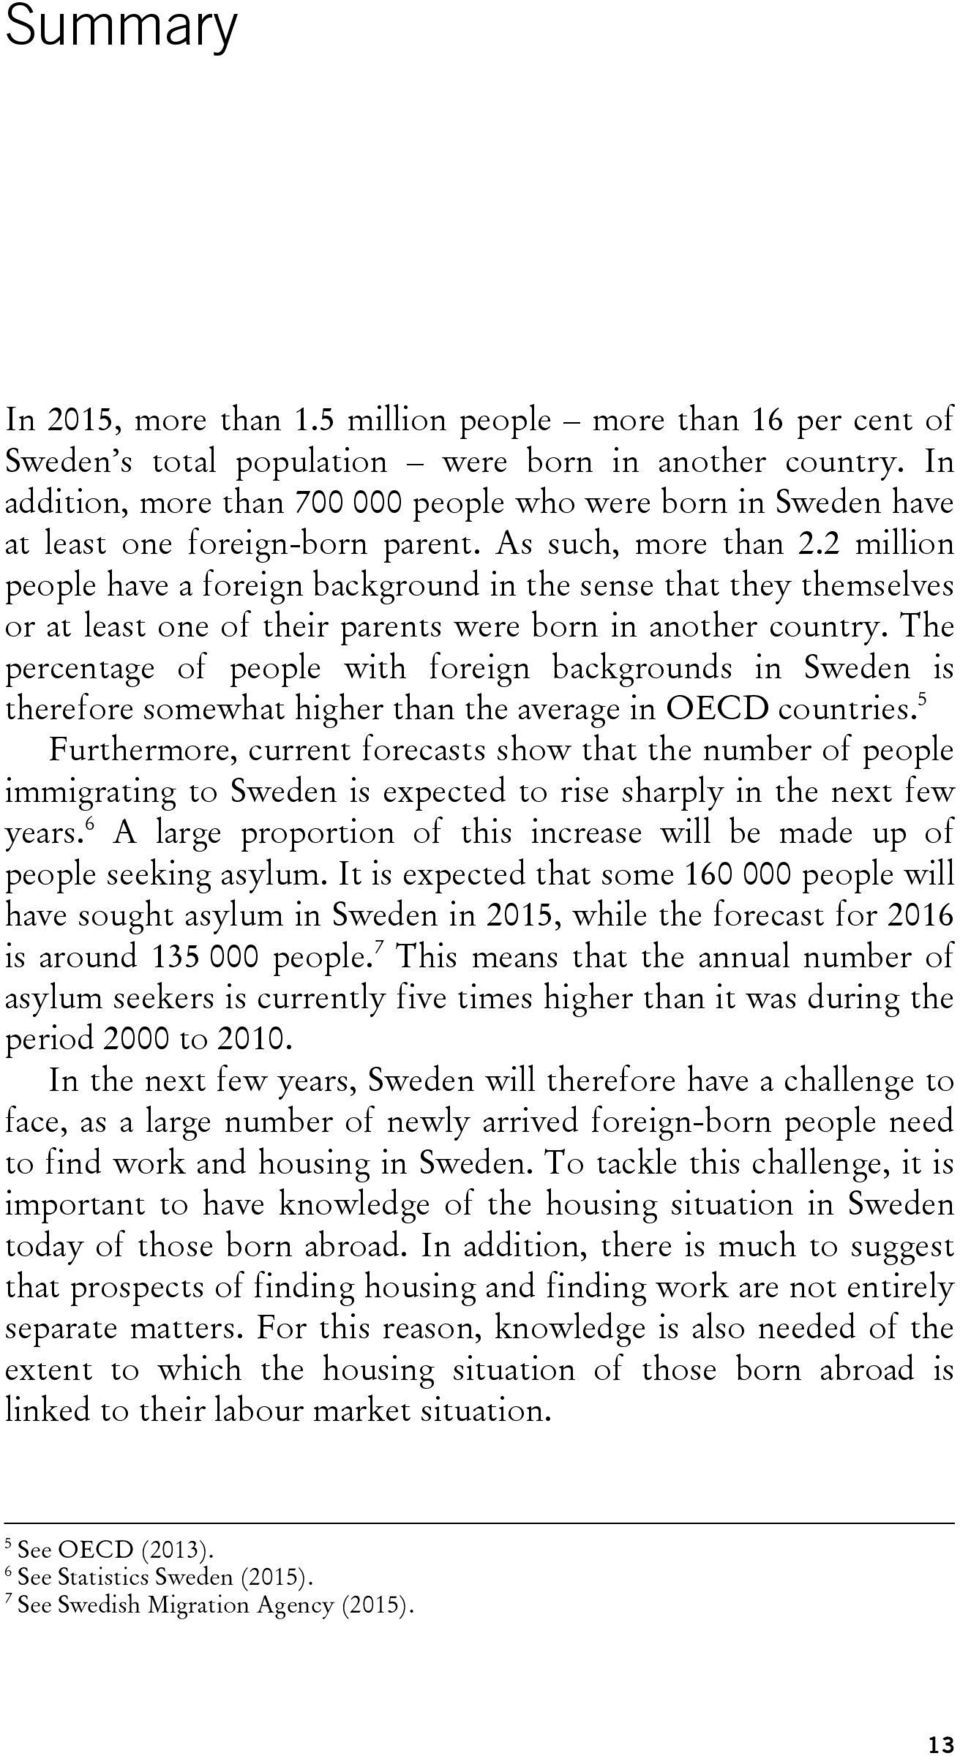 2 million people have a foreign background in the sense that they themselves or at least one of their parents were born in another country.